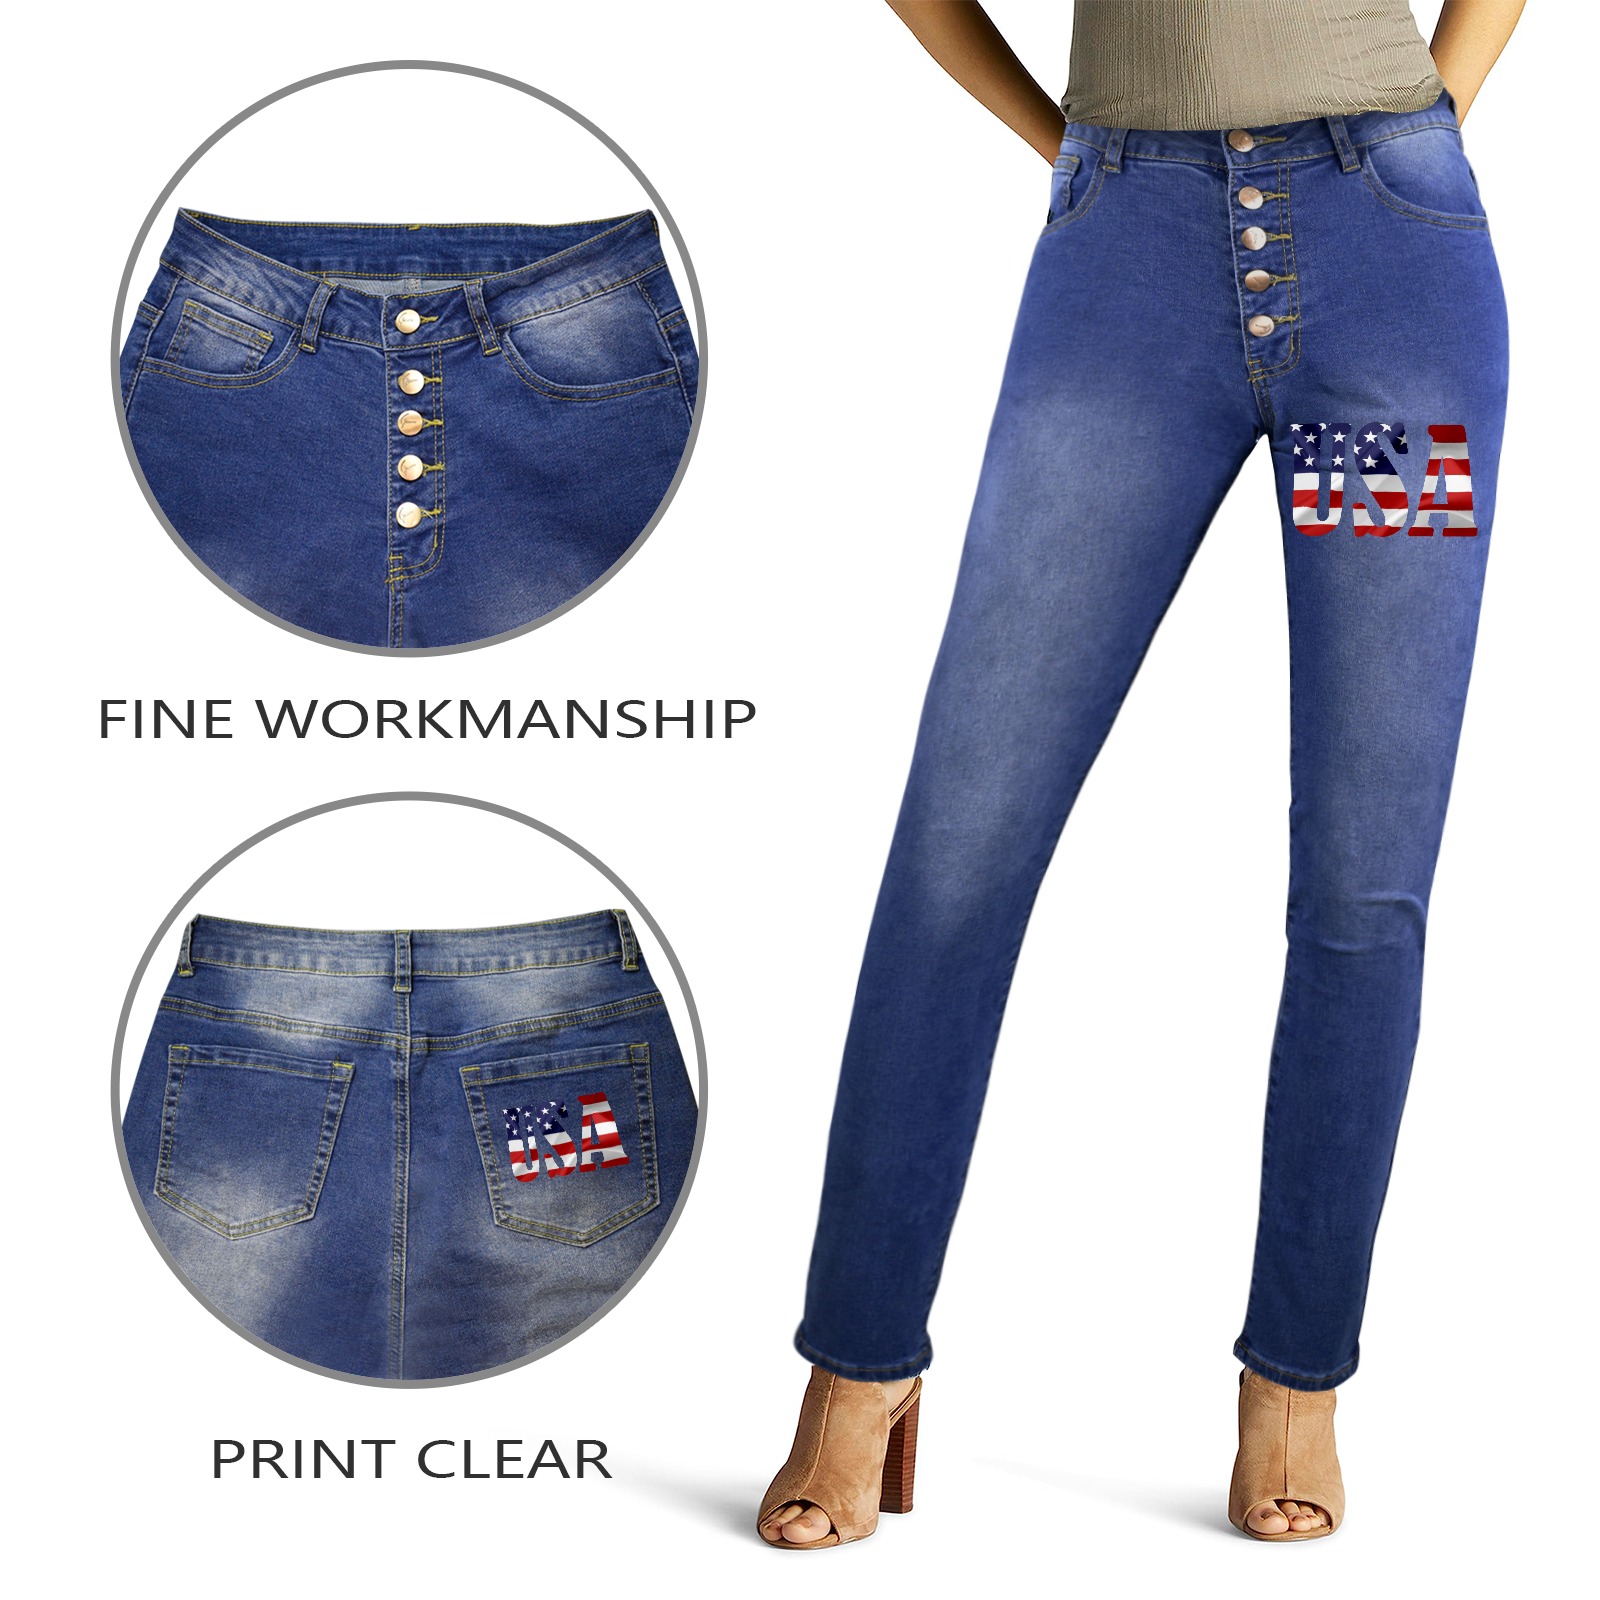 USA text decorated with the American flag art. Women's Jeans (Front&Back Printing)